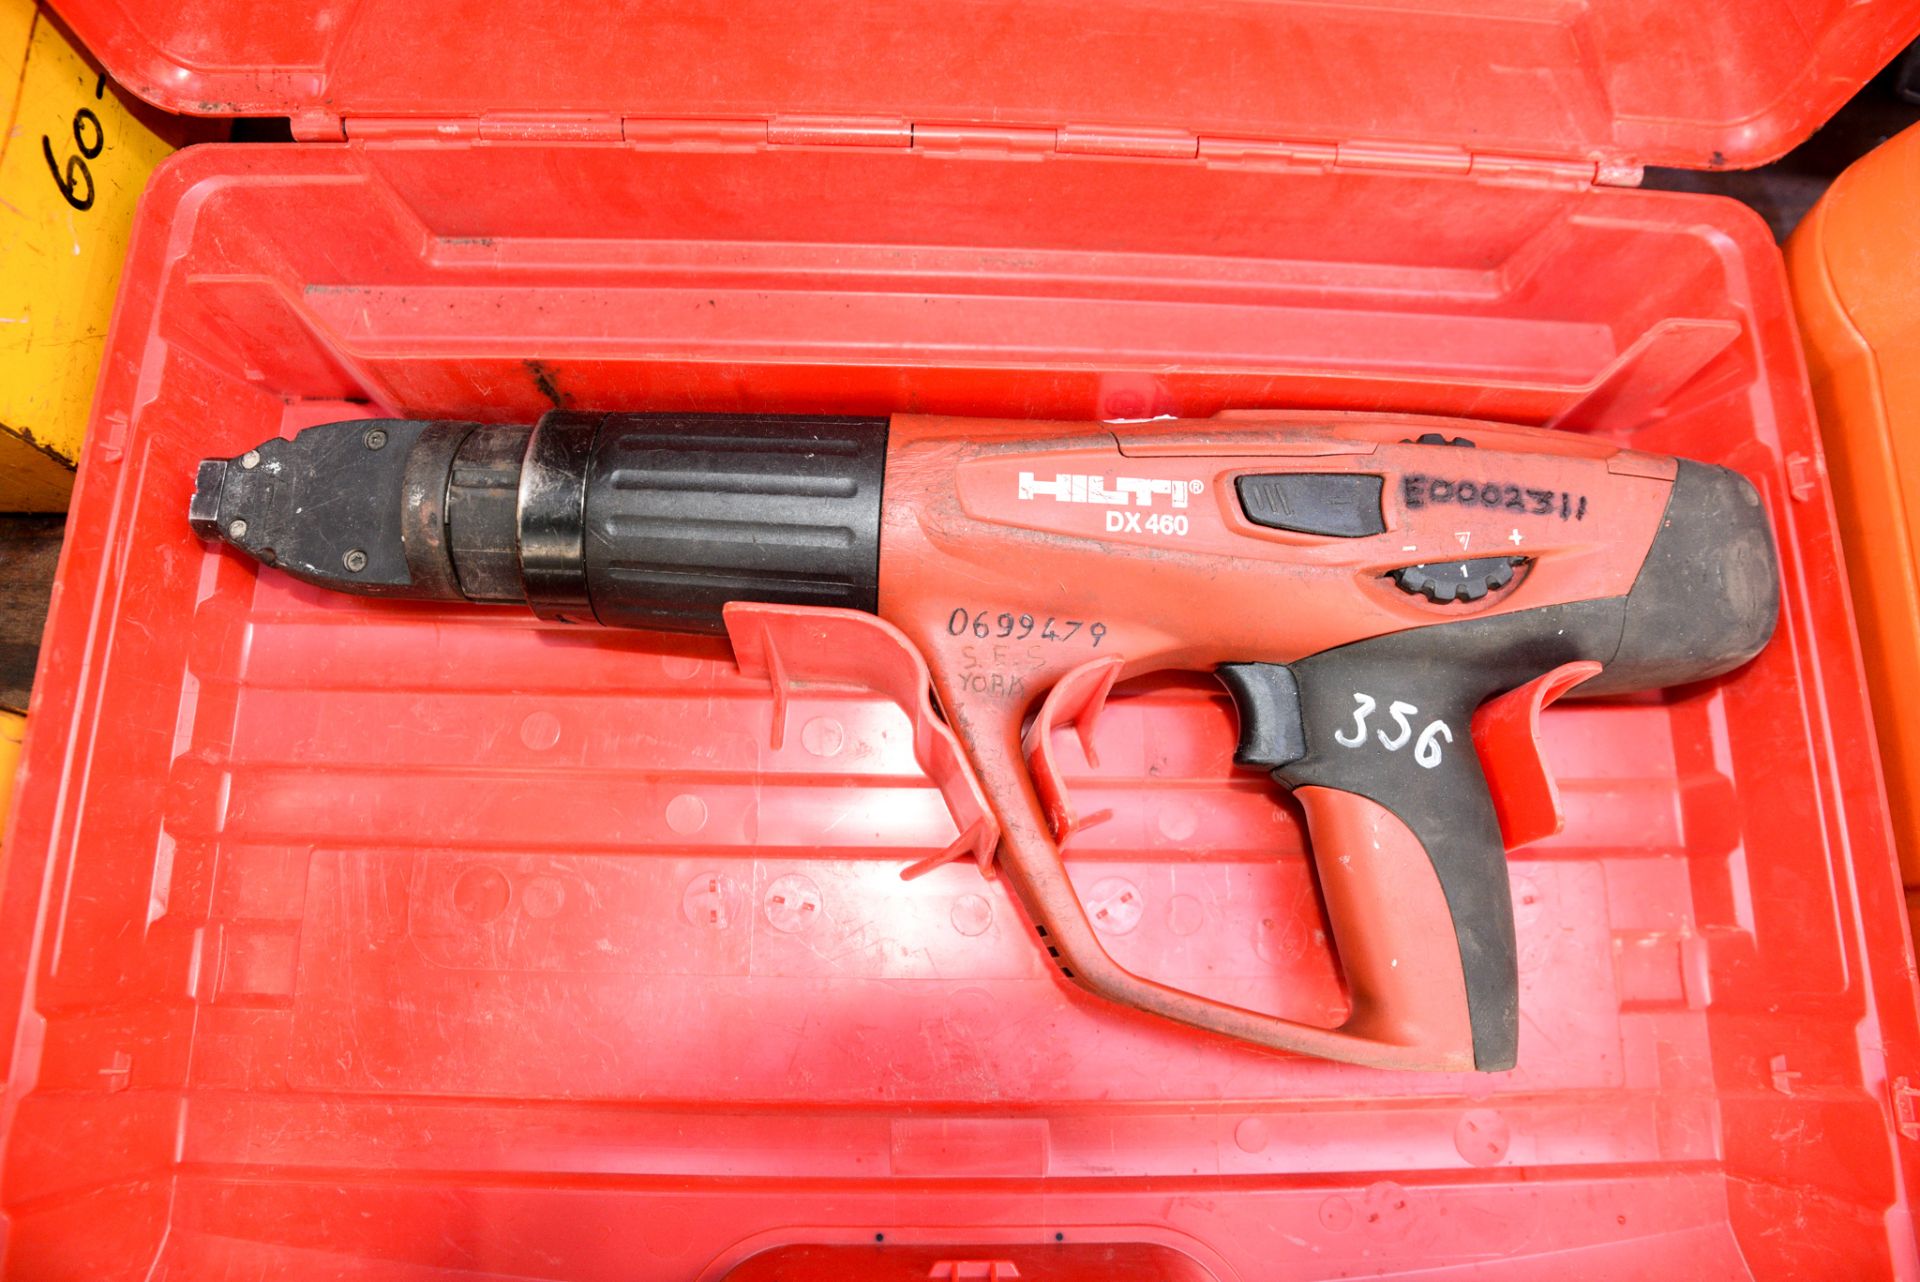 Hilti DX460 nail gun c/w carry case **No battery or charger** A585974